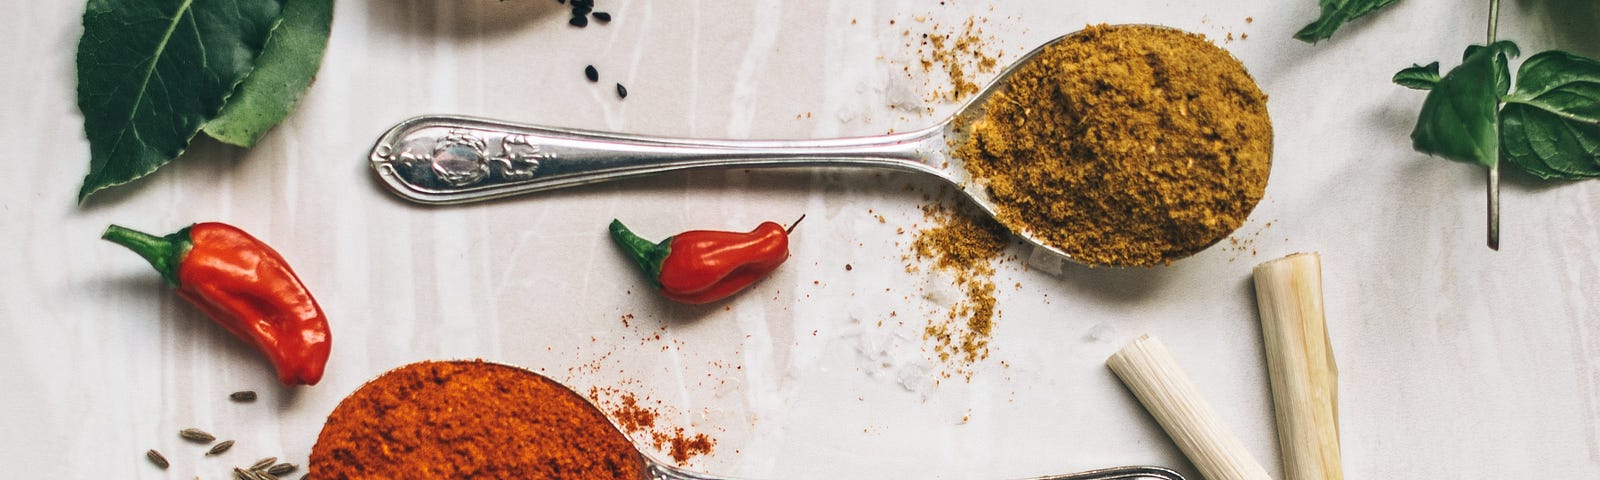 Spoonful of spices